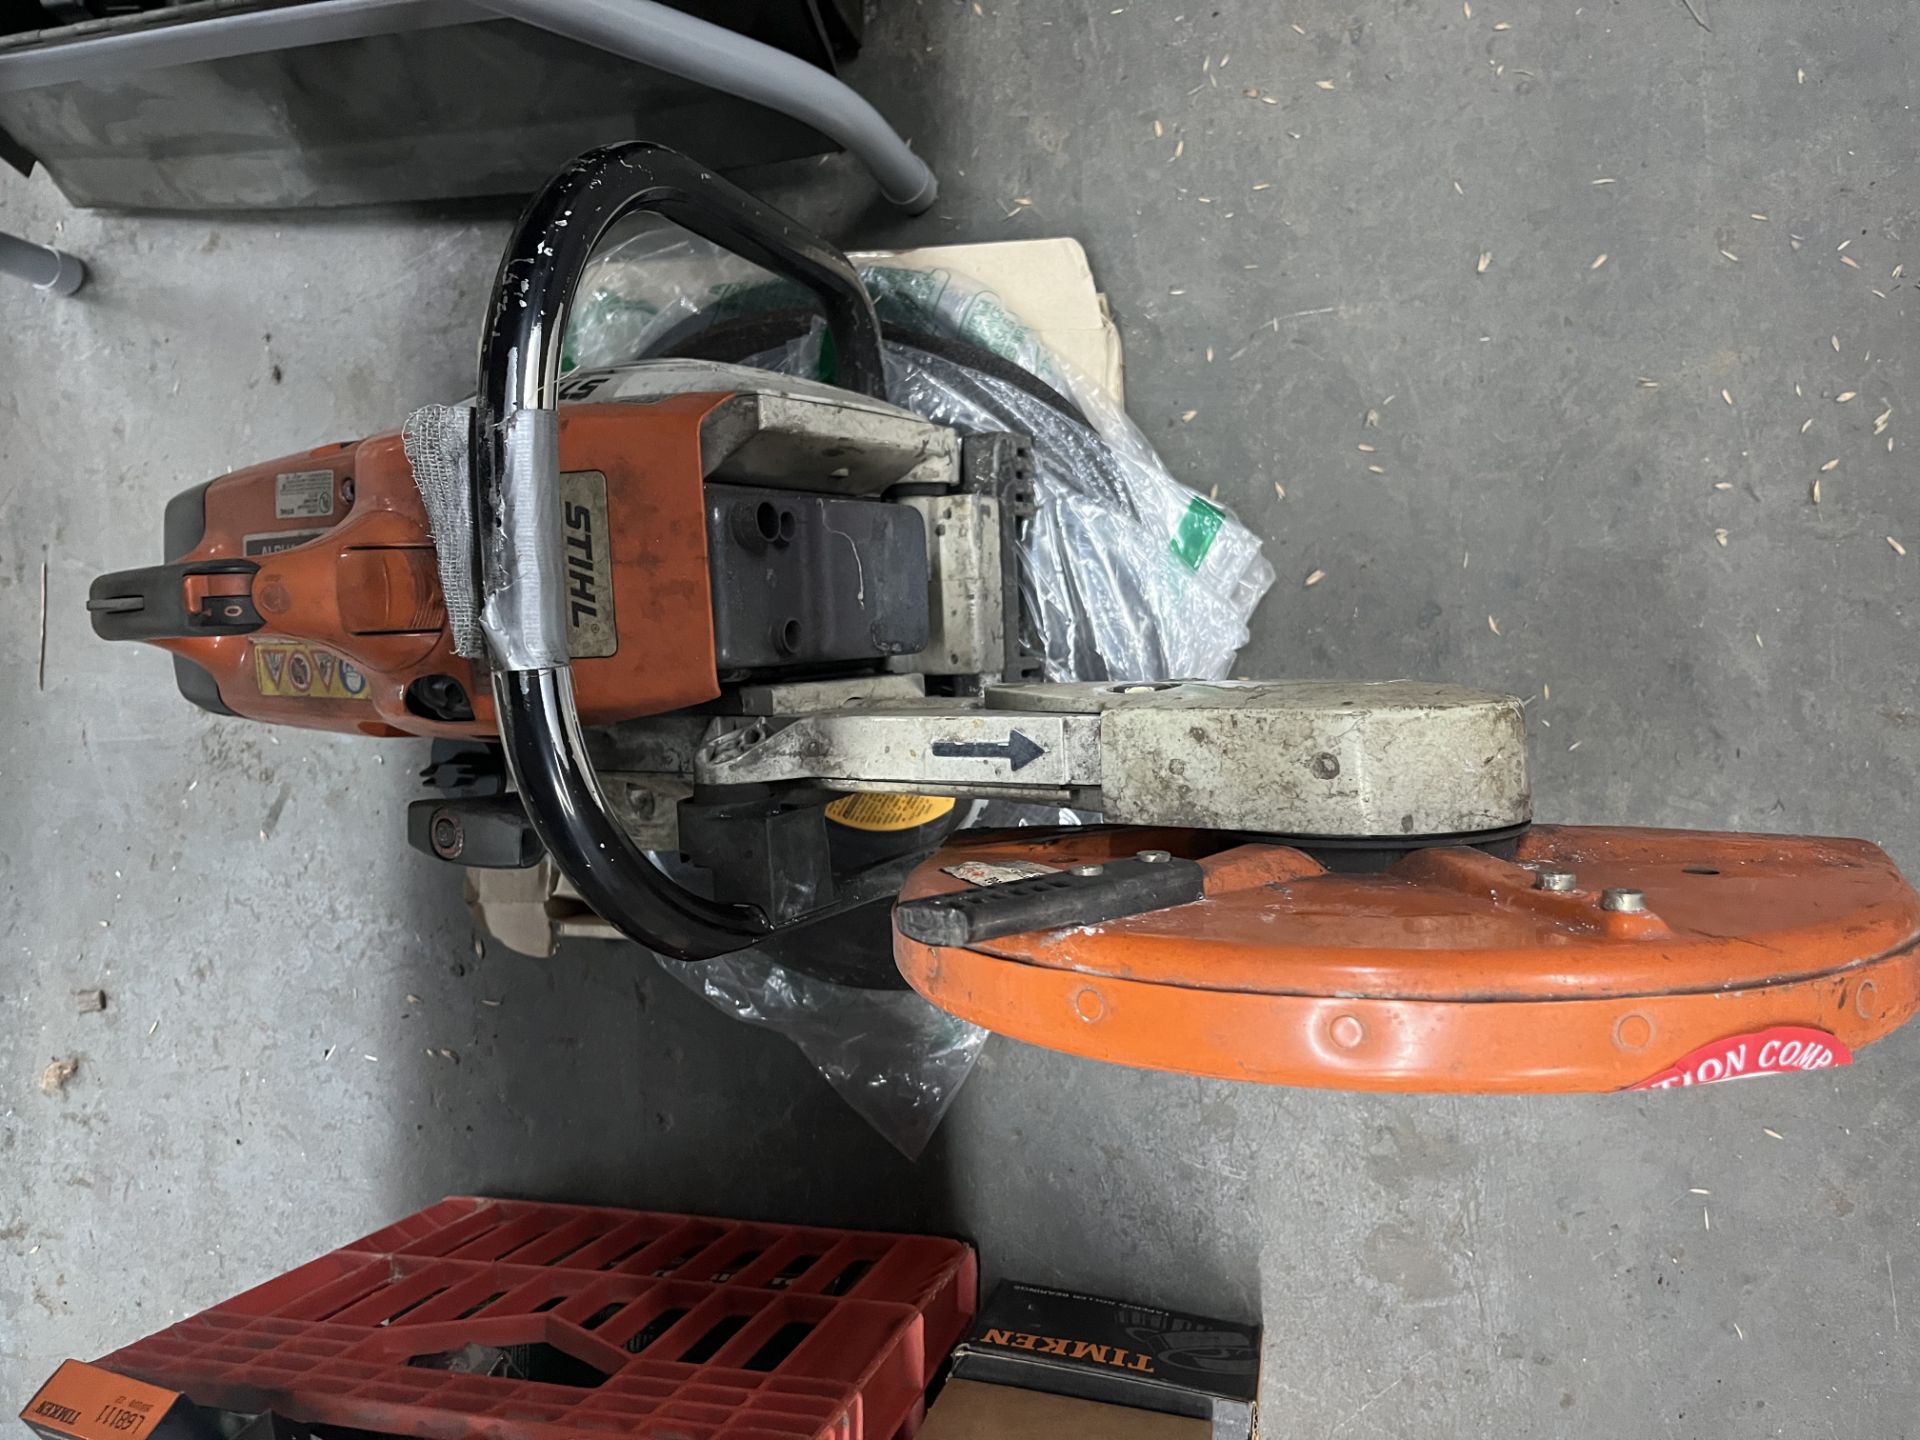 Stihl TS400 Abrasive Concrete Saw with Extra Blades - Image 3 of 4